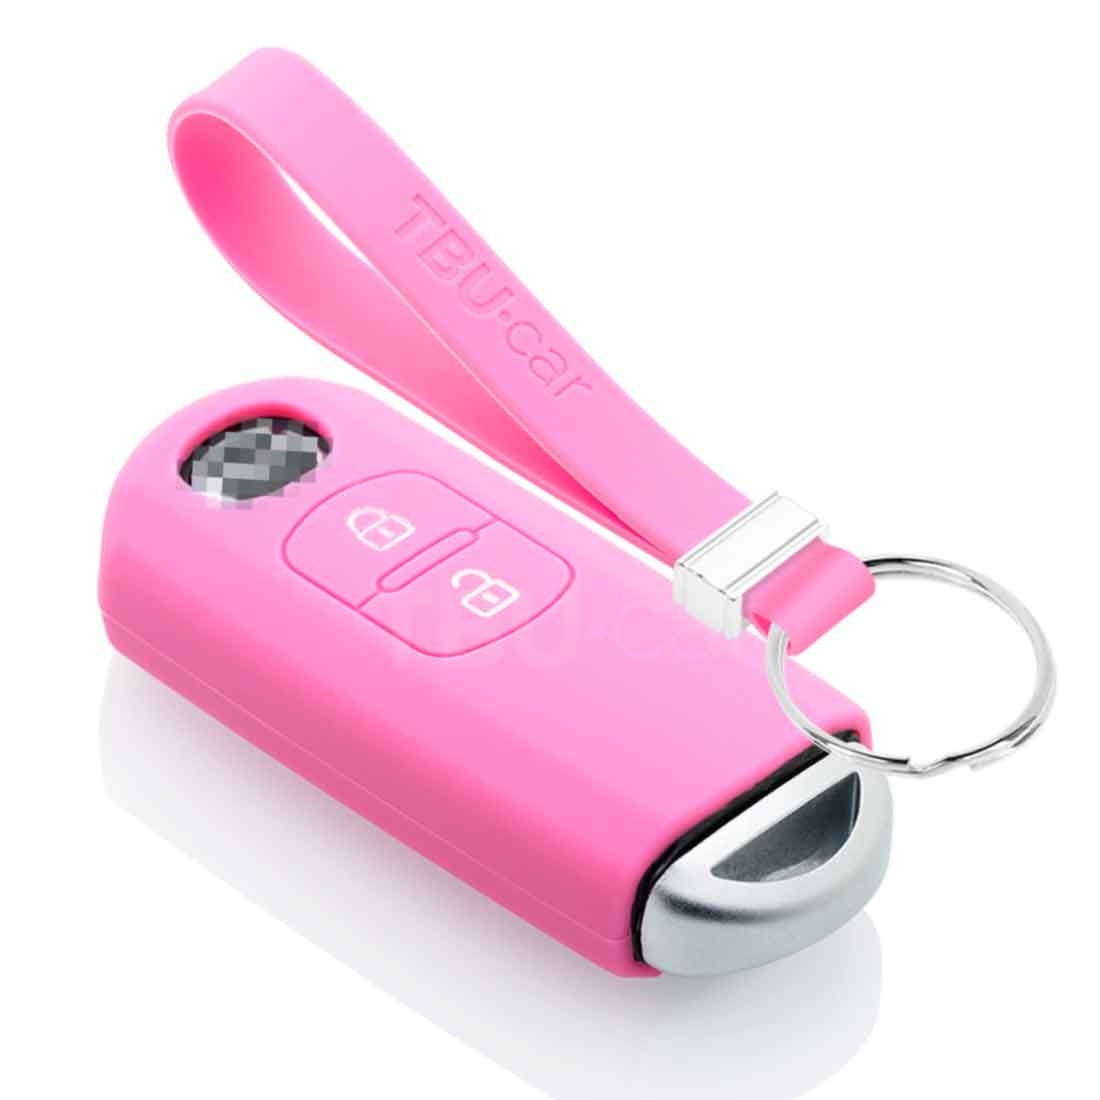 TBU car TBU car Car key cover compatible with Mazda - Silicone Protective Remote Key Shell - FOB Case Cover - Pink